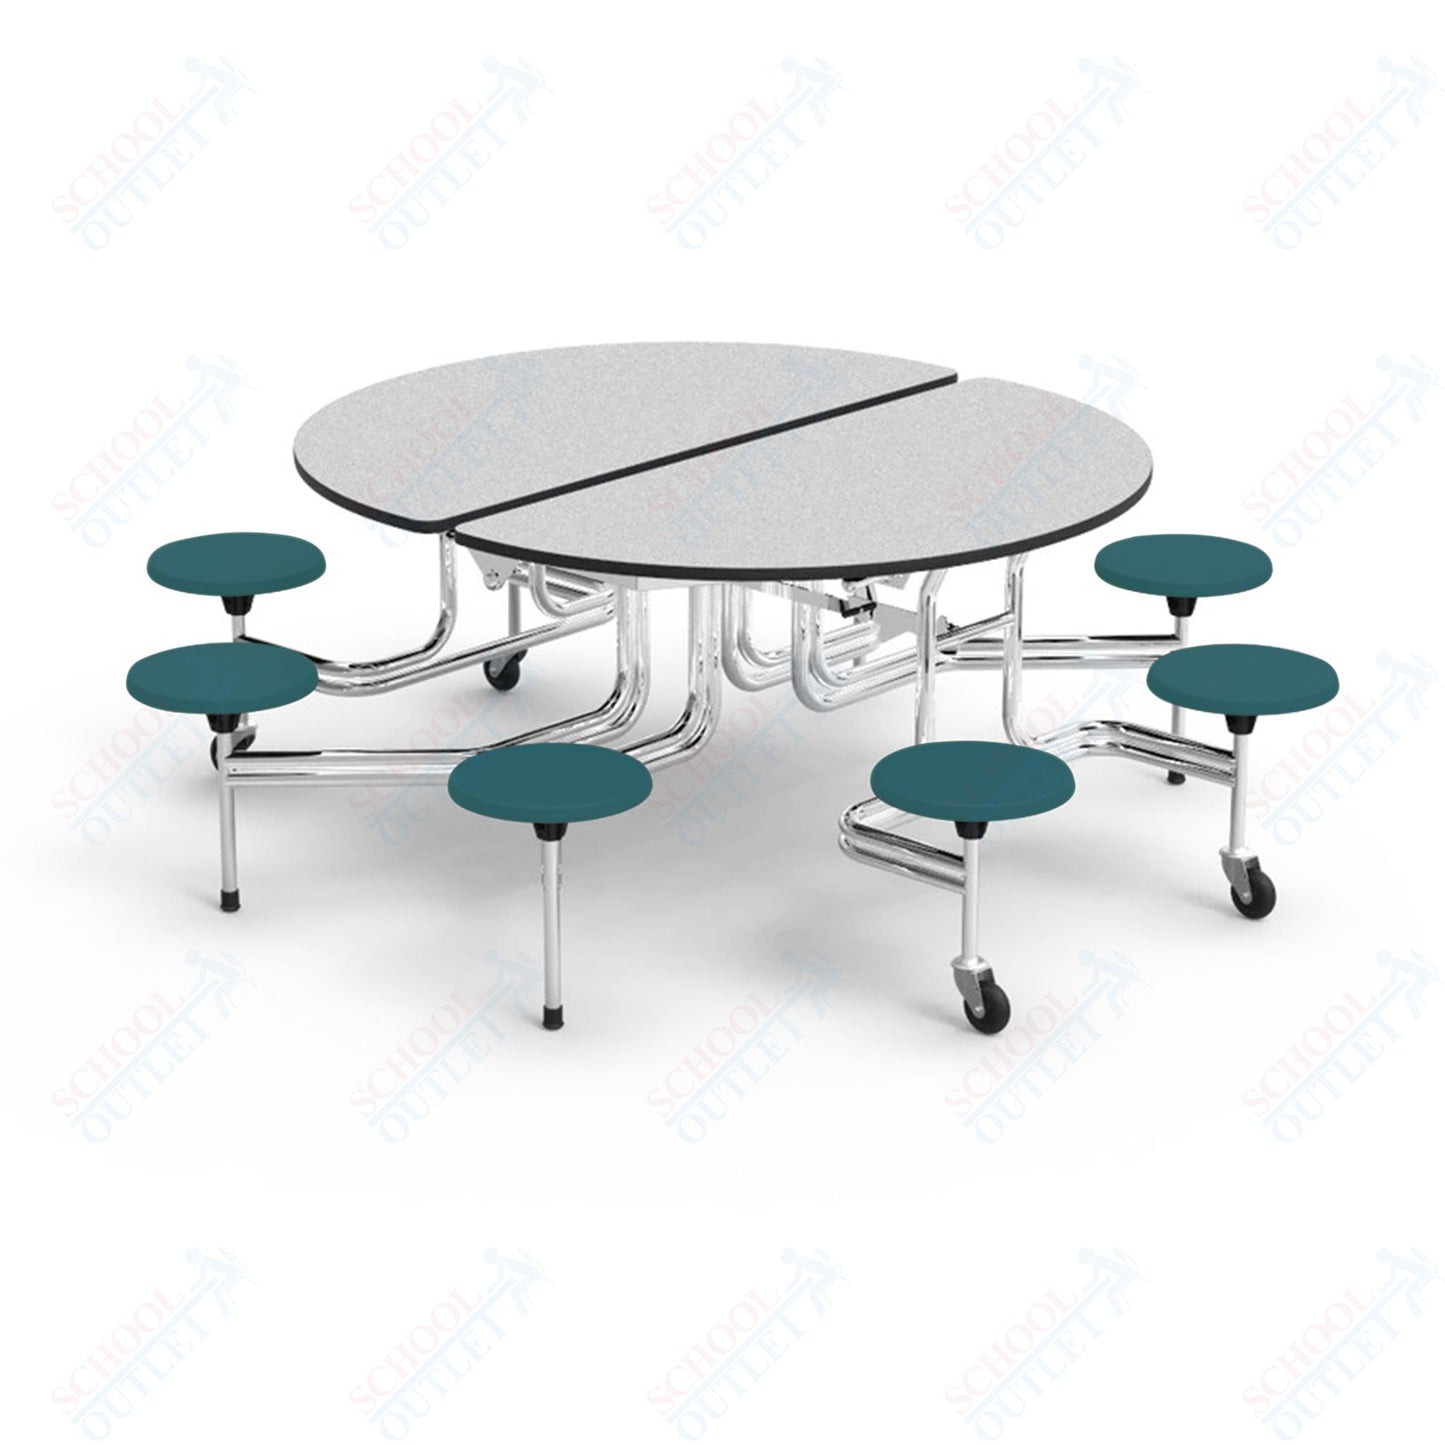 Virco MTSO152758AE - Round Mobile Stool Cafeteria Table - Sure Edge - 15" Seat Height - 8 Stools (Virco MTSO152758AE)